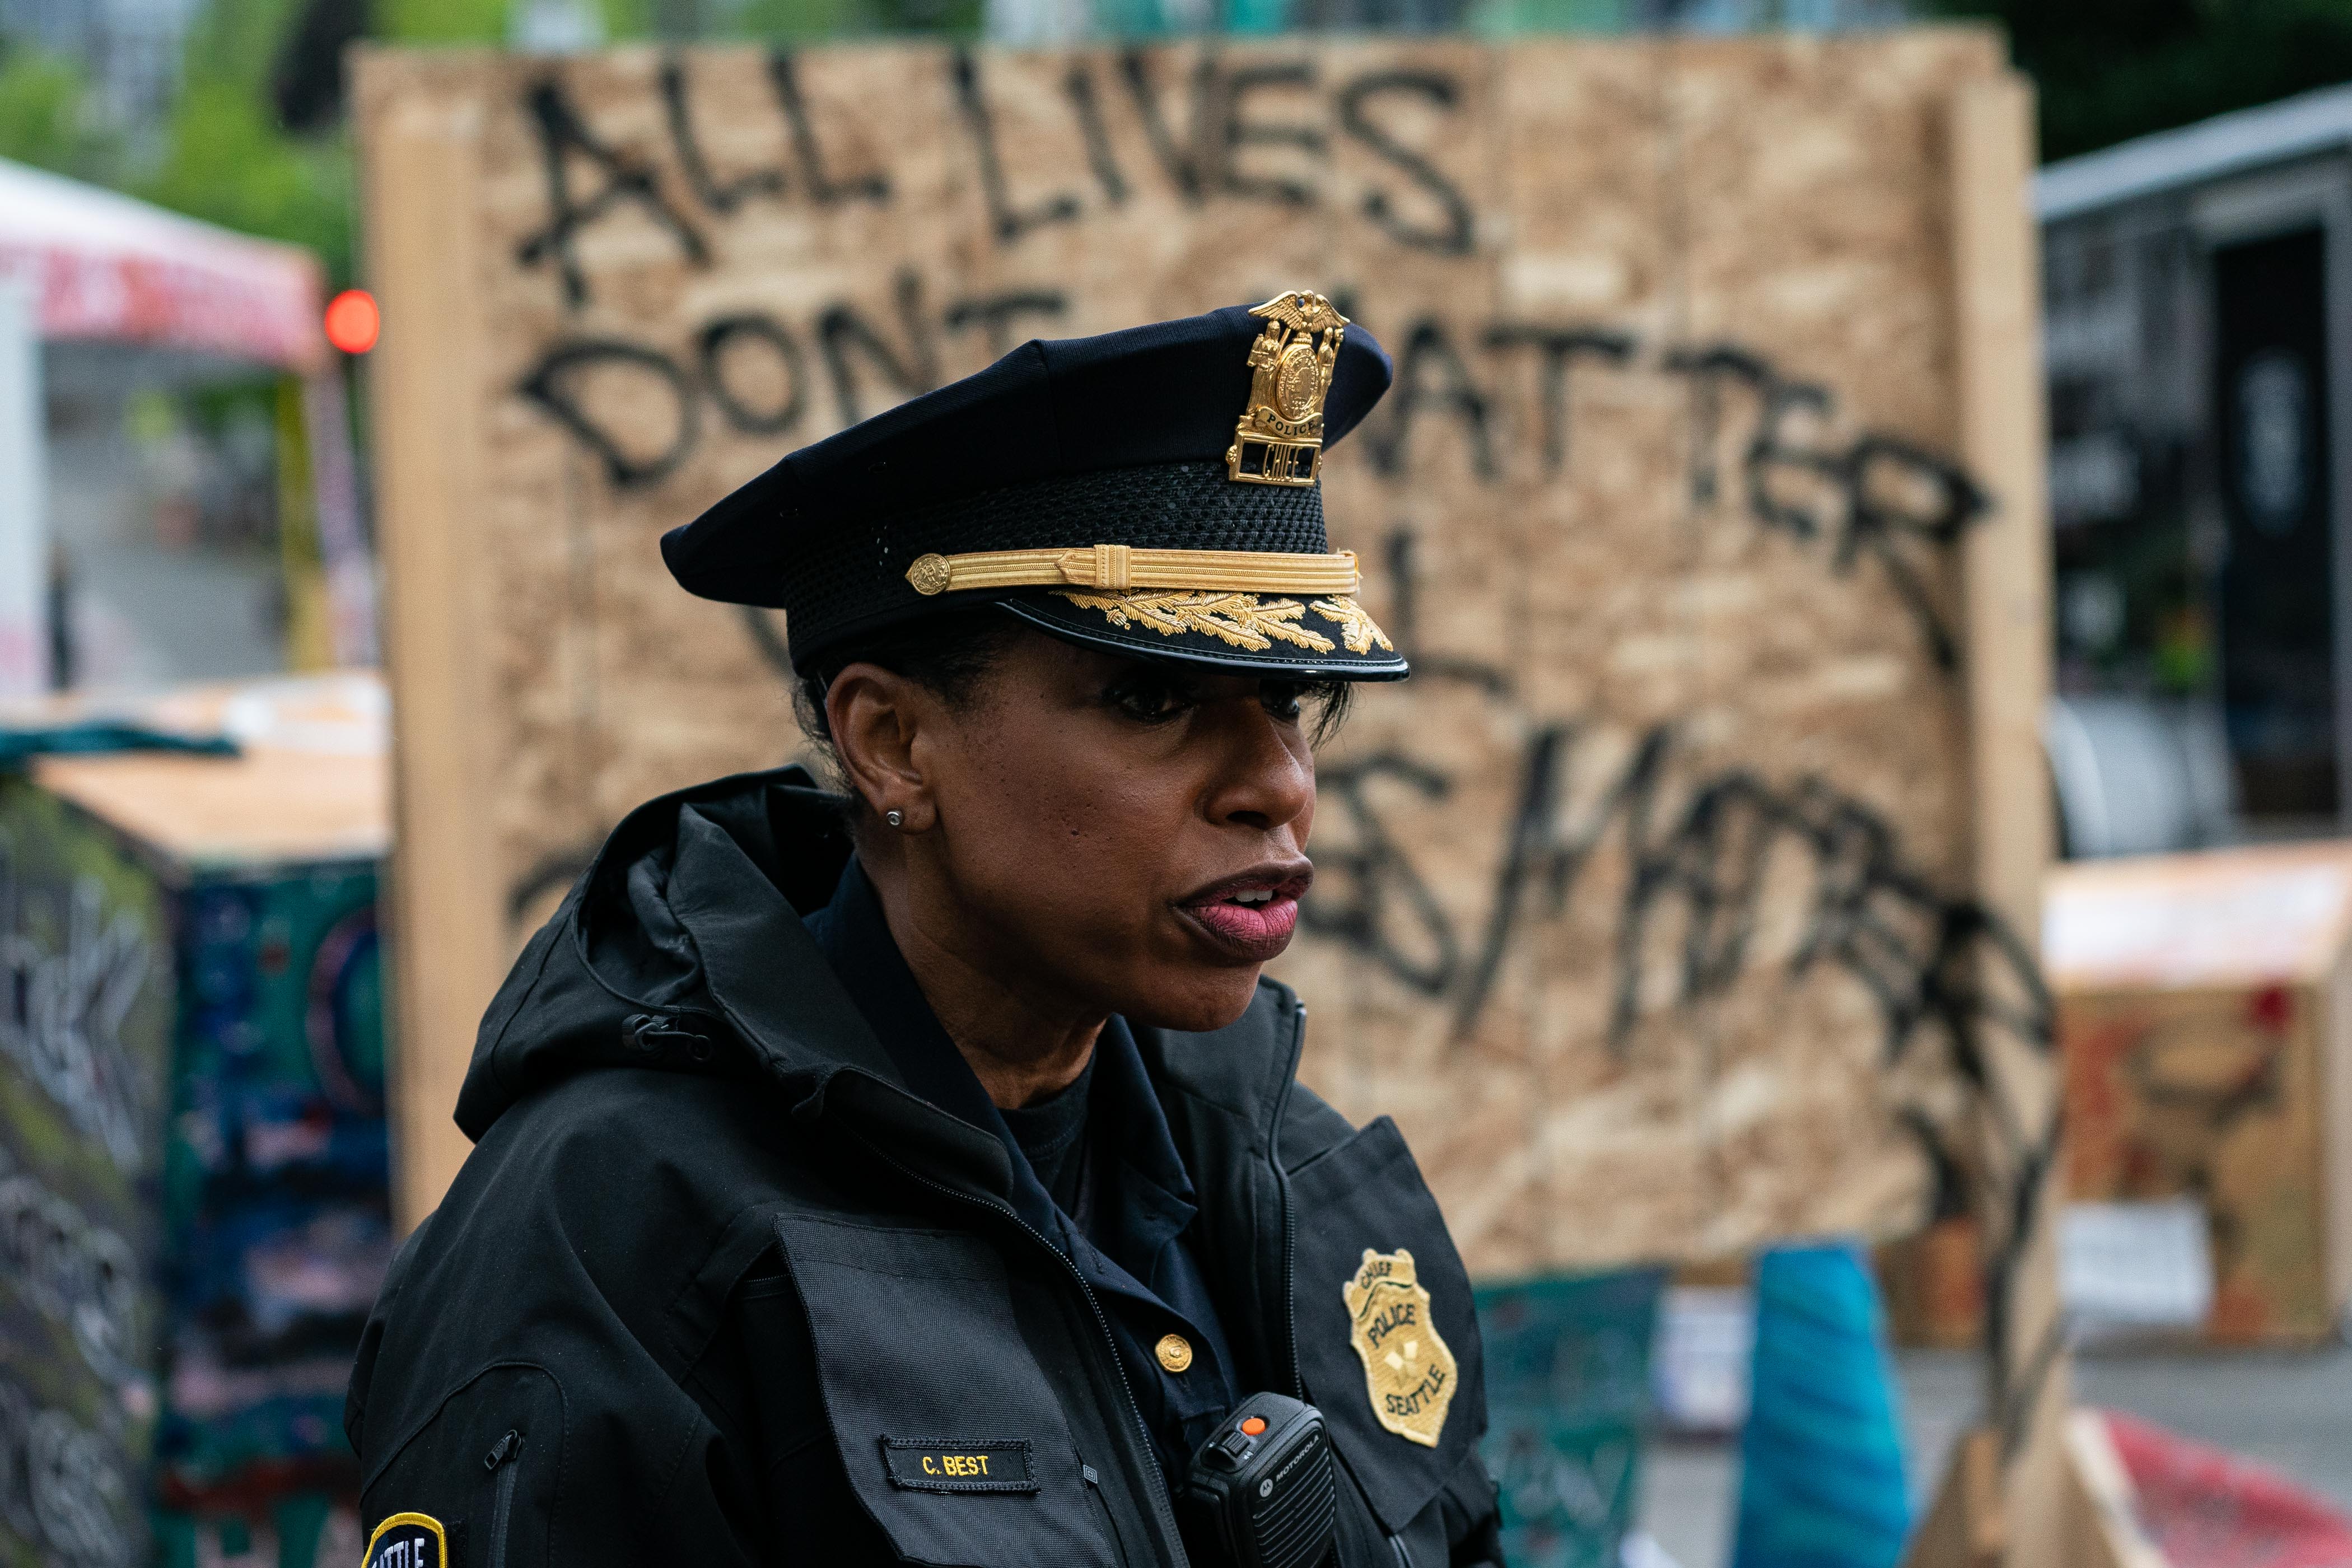 SEATTLE, WA - JULY 01: Seattle Police Chief Carmen Best addresses the press as city crews dismantle the Capitol Hill Organized Protest (CHOP) area outside of the Seattle Police Department's vacated East Precinct on July 1, 2020 in Seattle, Washington. Police reported making at least 31 arrests while clearing the CHOP area this morning. (Photo by David Ryder/Getty Images)